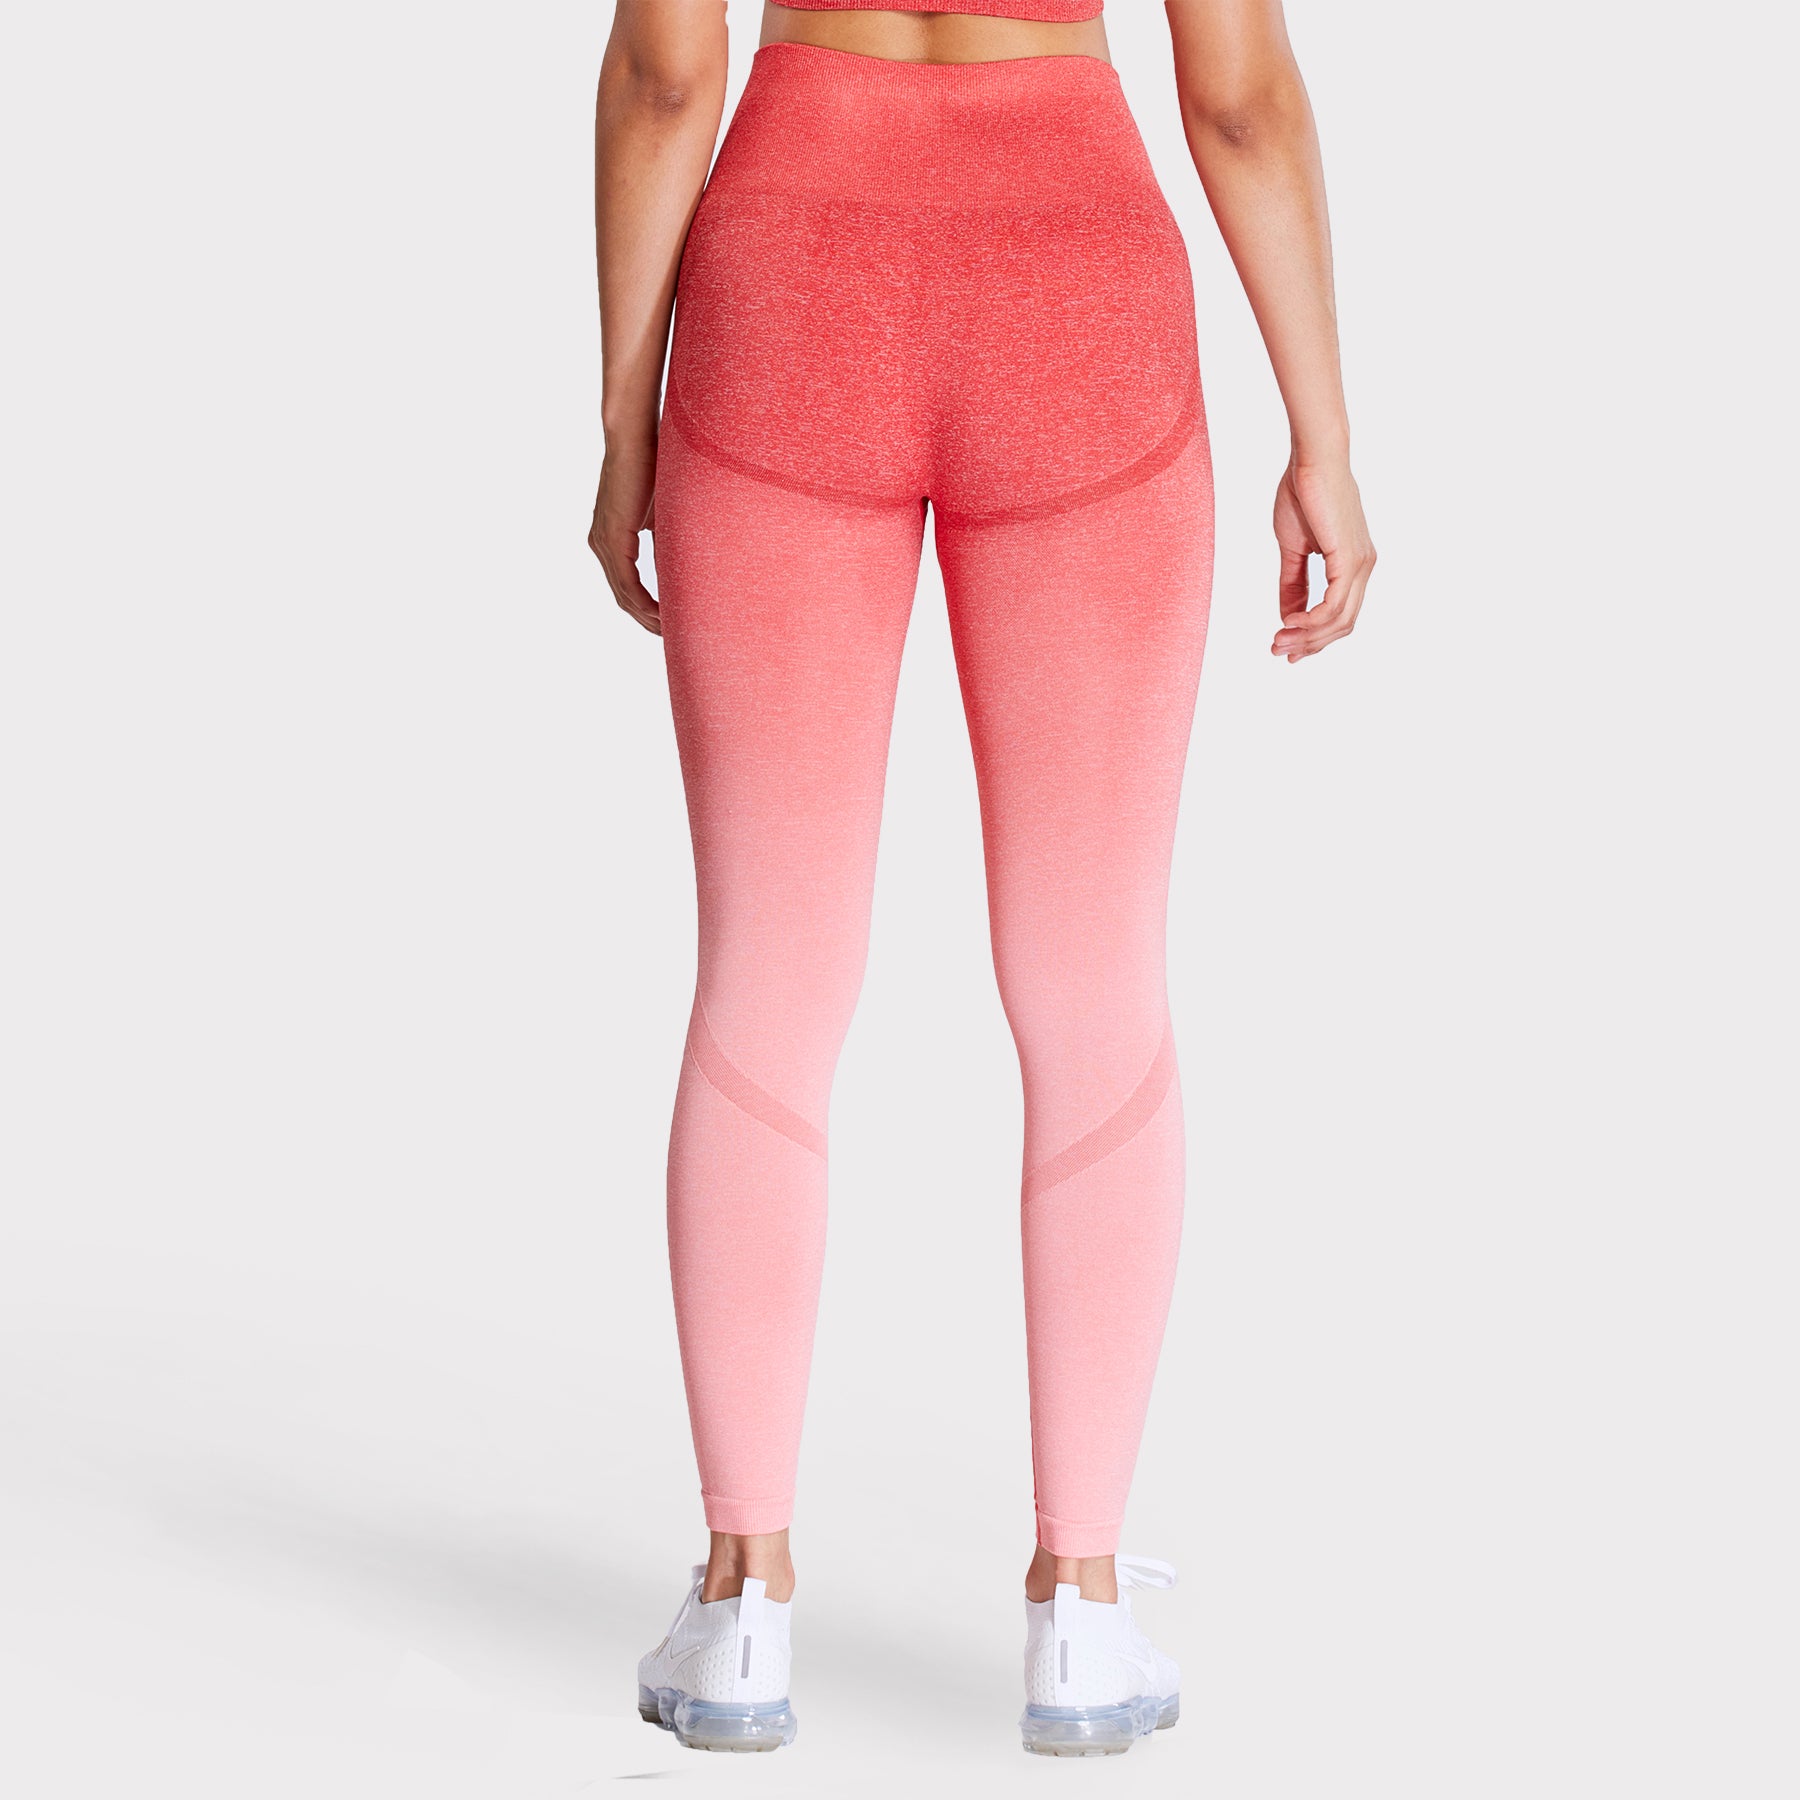 Seamless Ombre Workout Legging - Fairlie Curved